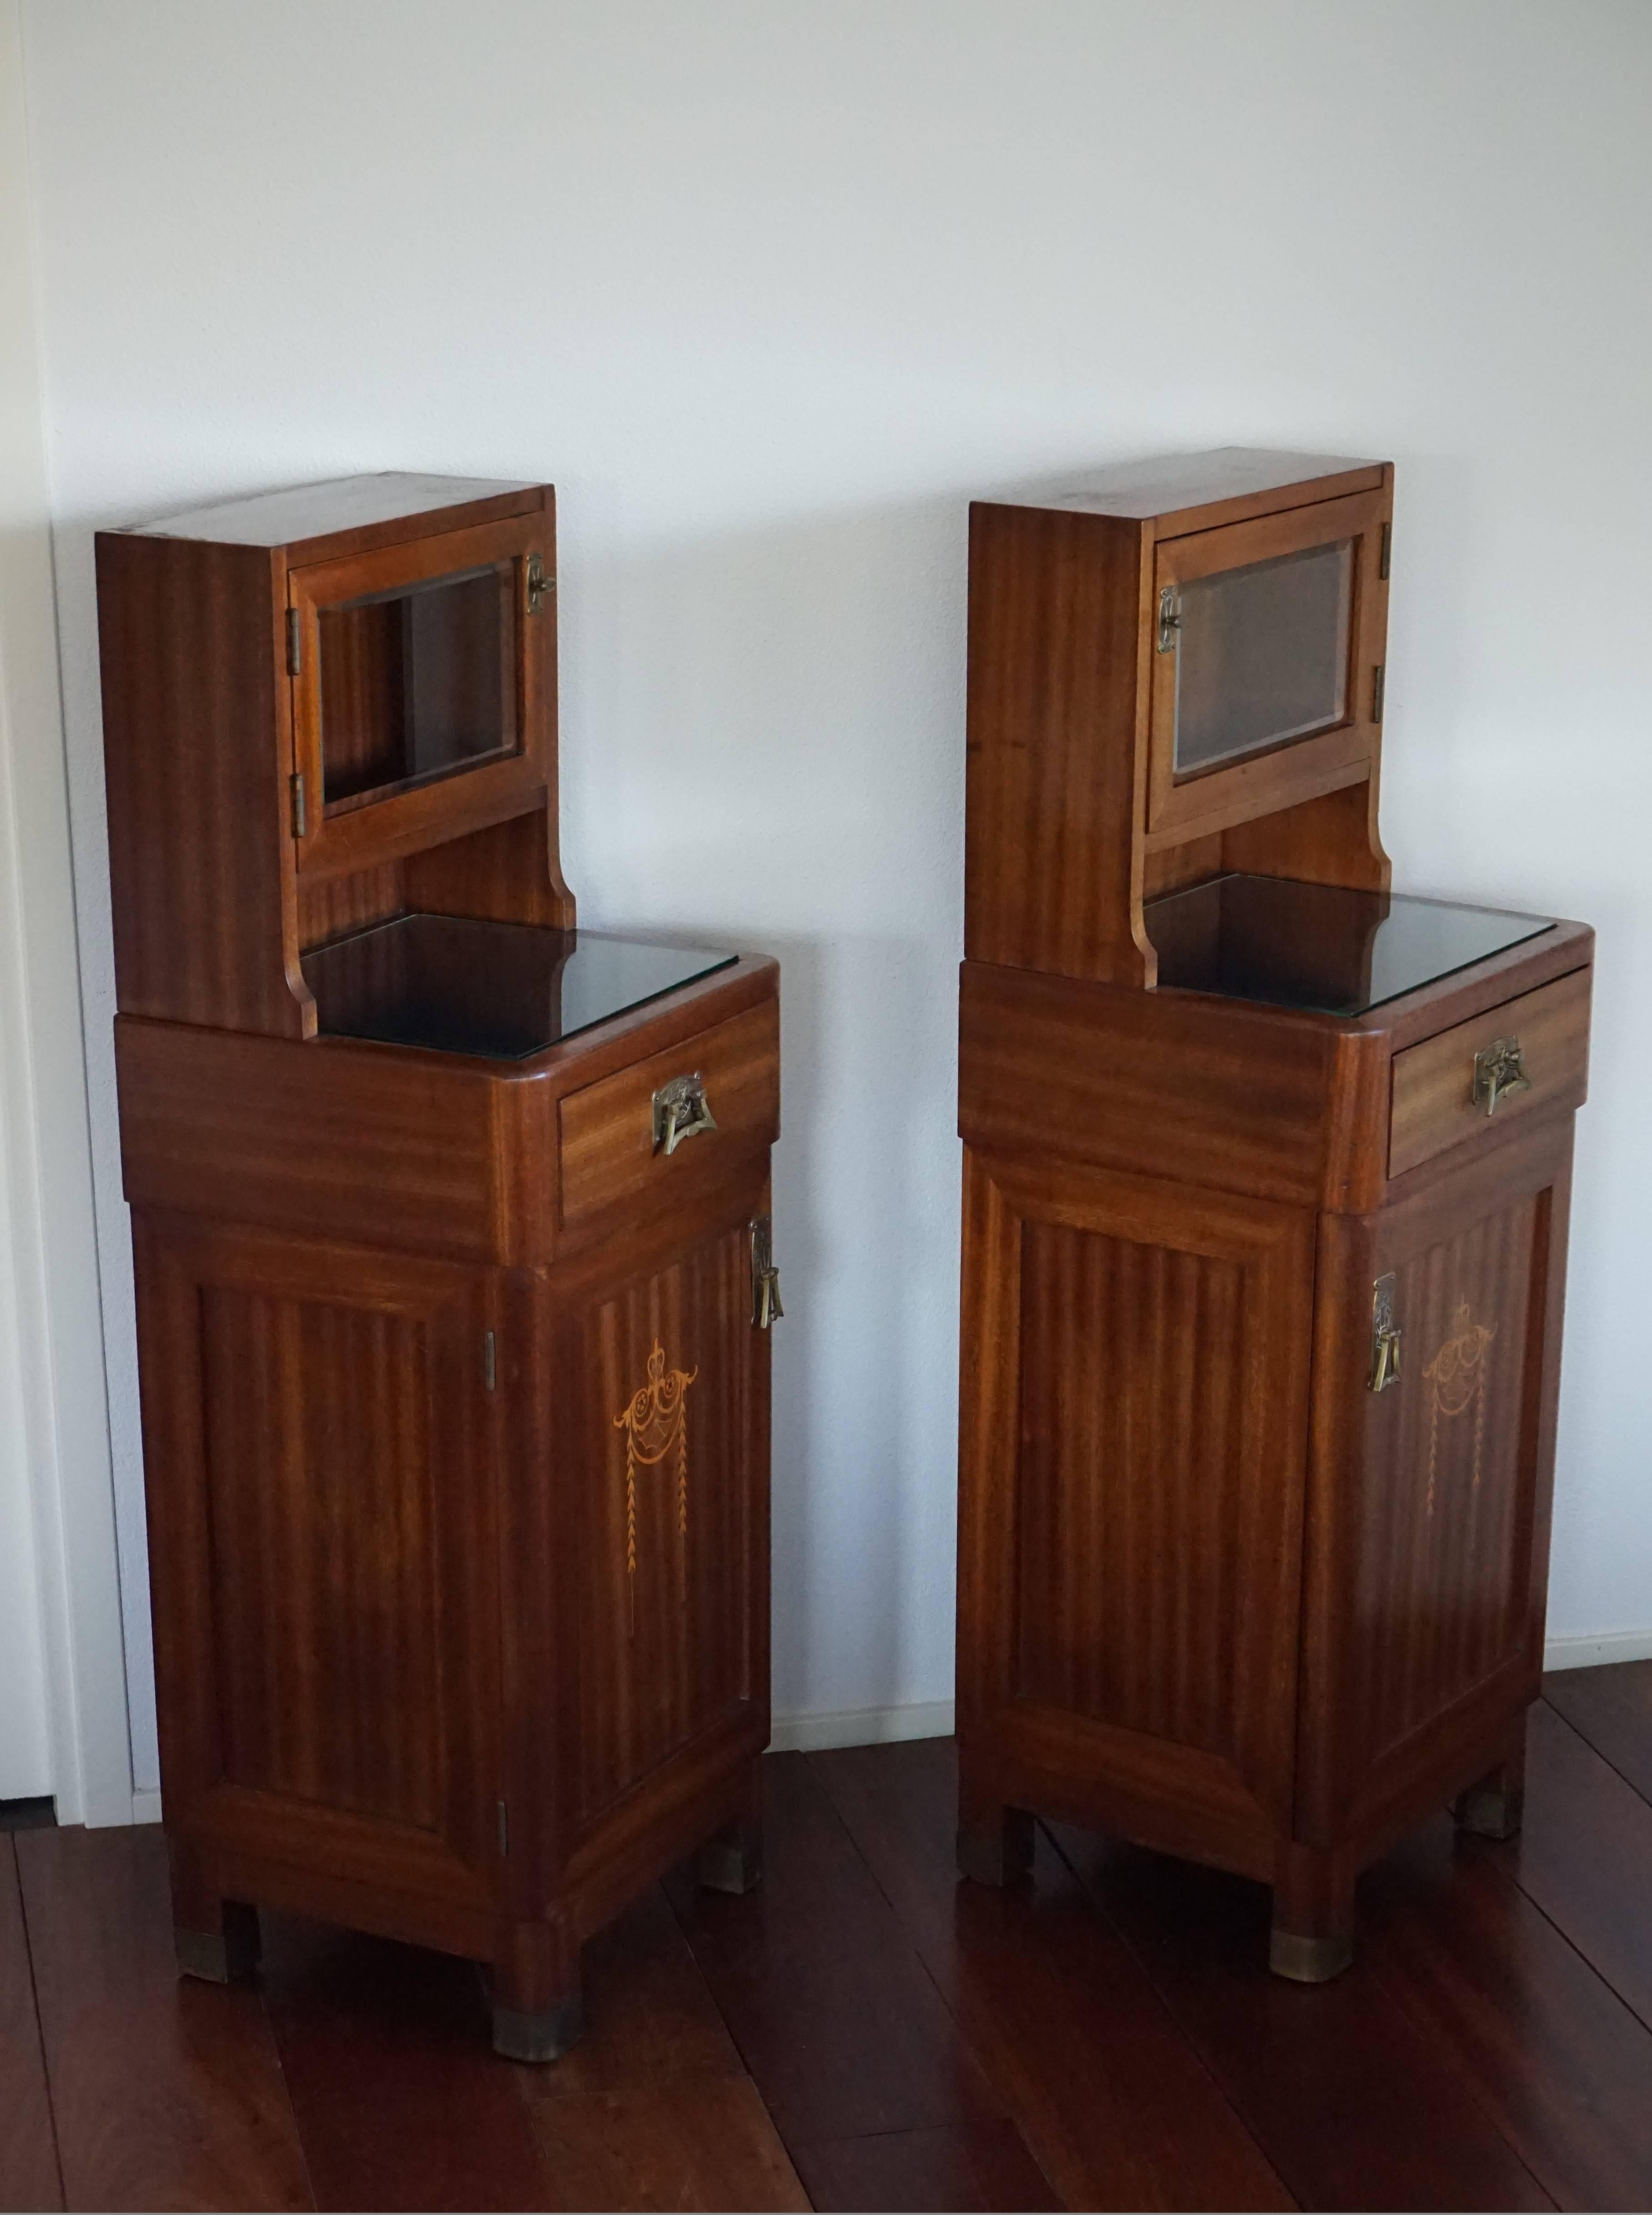 Wonderful Mahogany Art Nouveau Bedside Tables / Nightstands with Satinwood Inlay 1